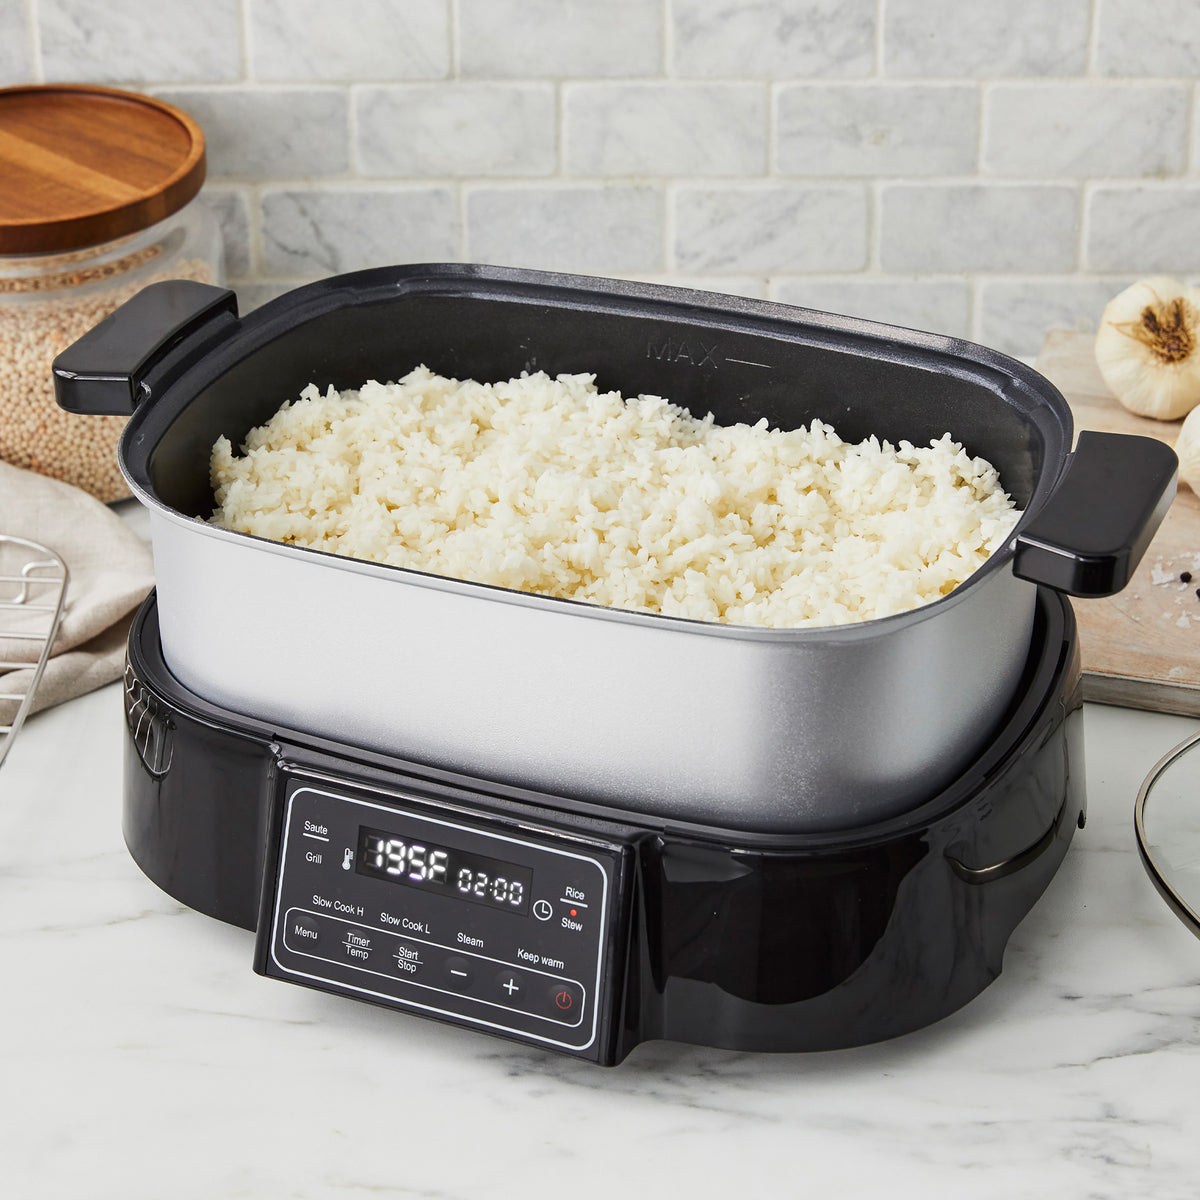 The Multi-Sectional Meal Skillet